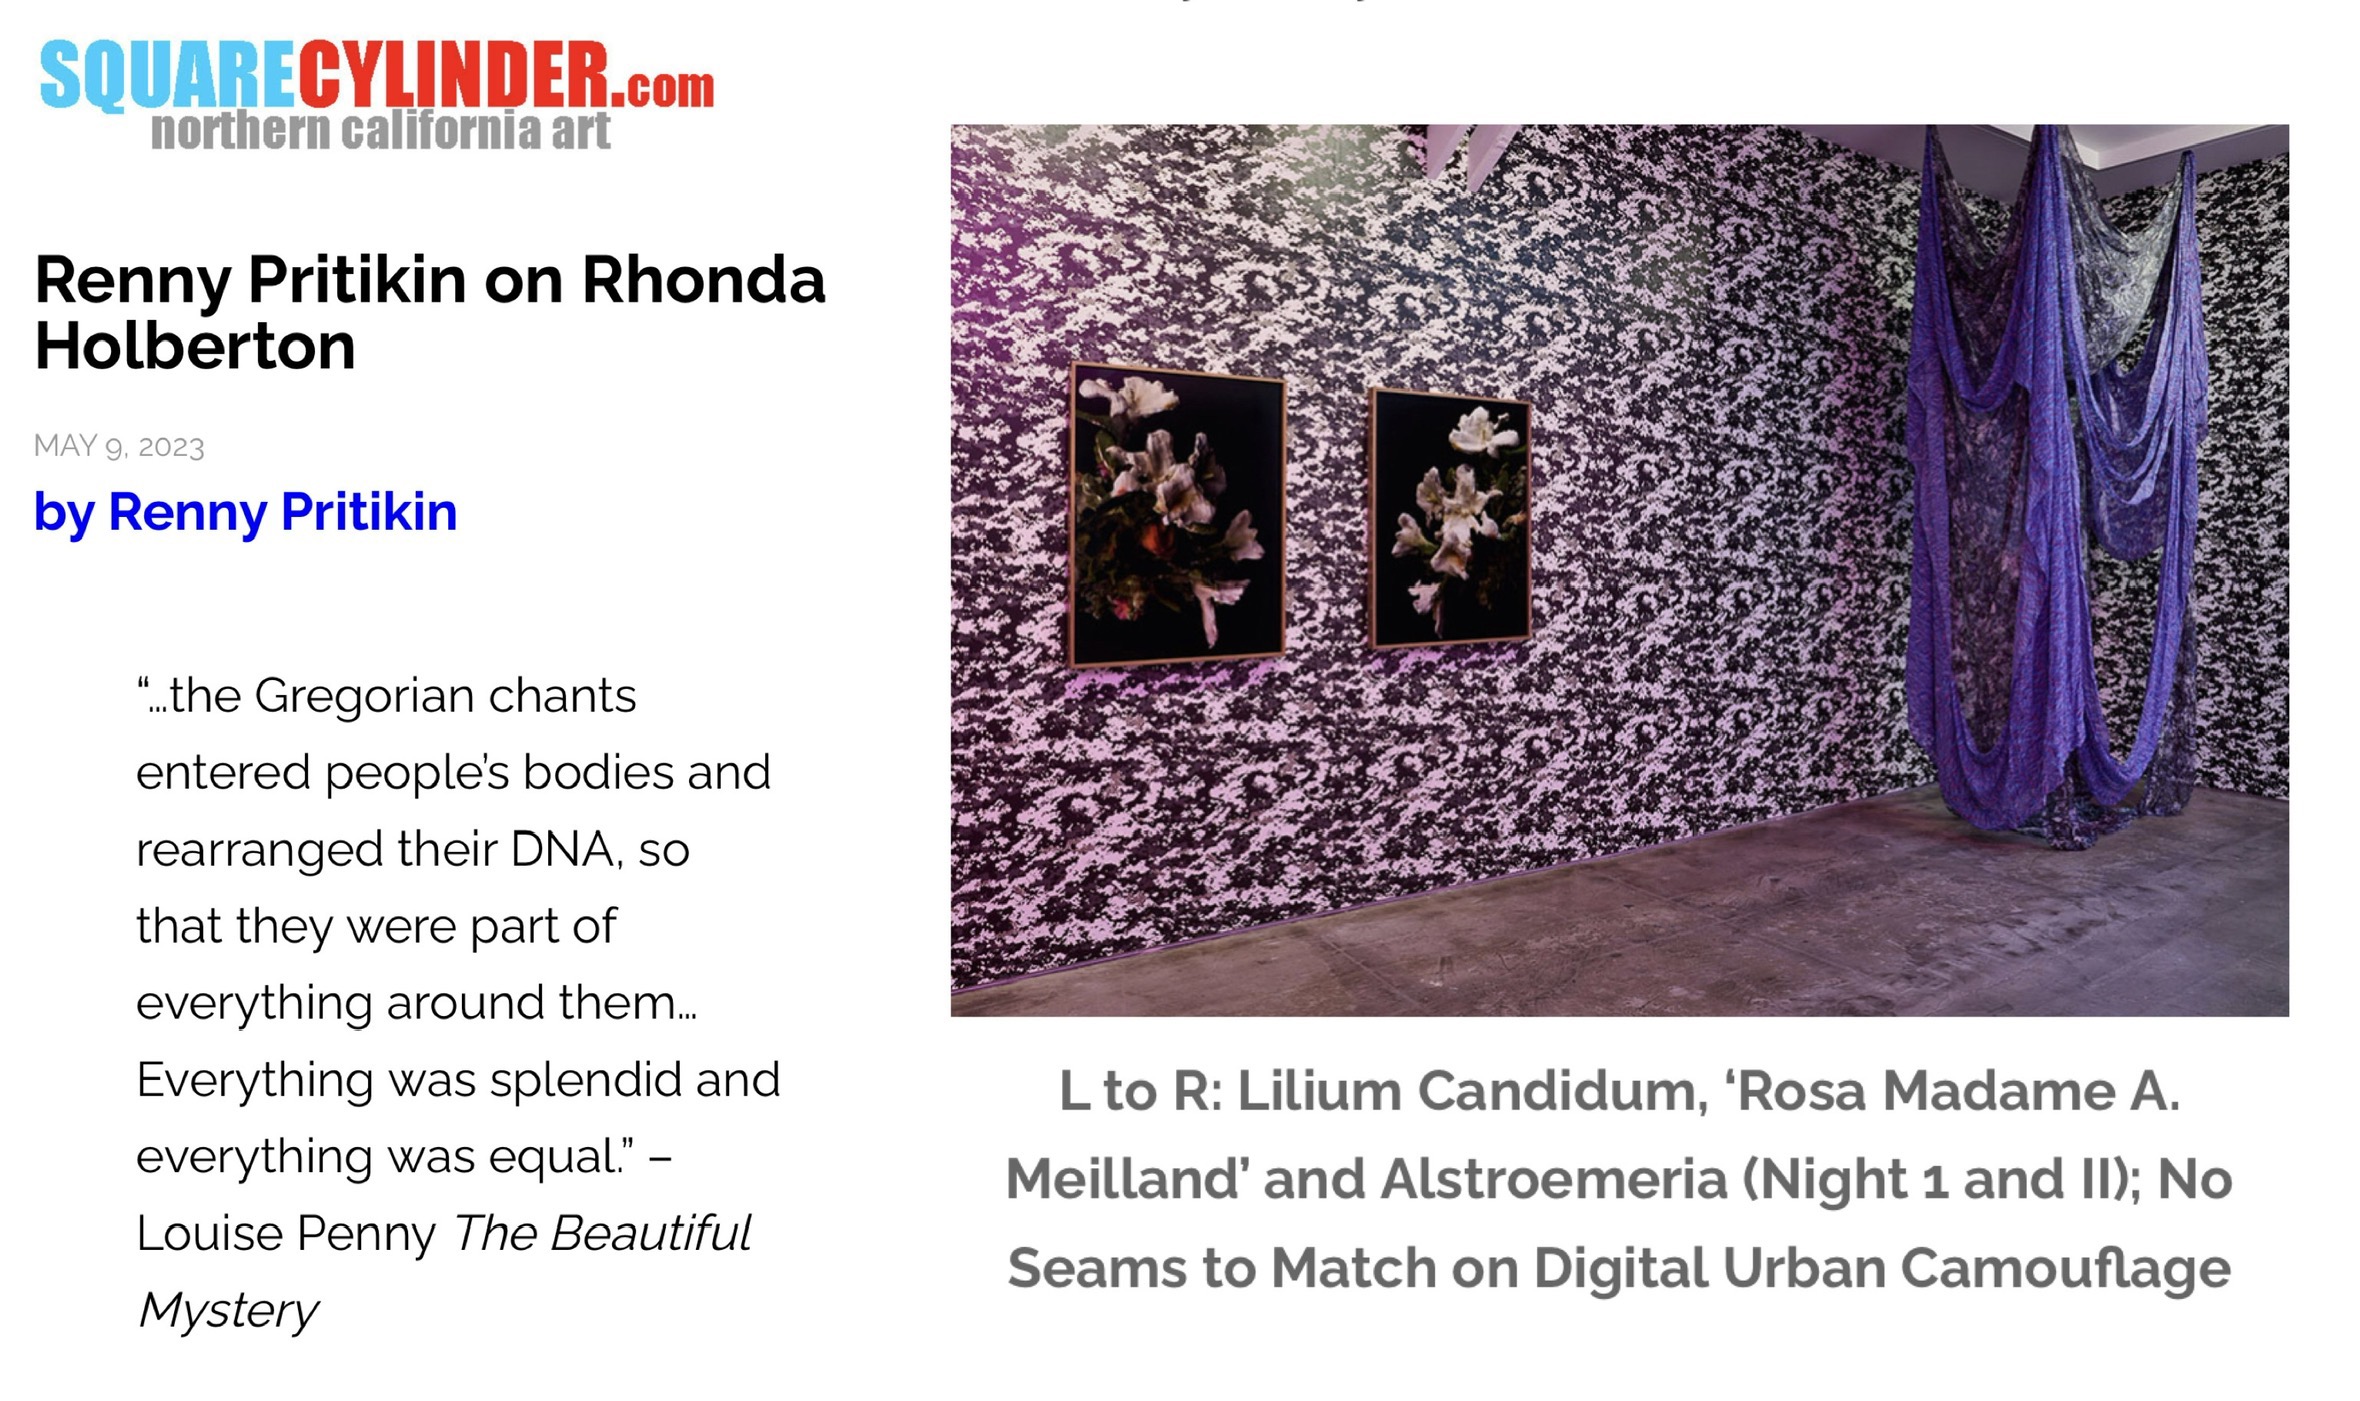 Renny Pritikin reviews Rhonda Holberton’s exhibition at the San José Institute of Art in Square Cylinder & CULT Aimee Friberg Exhibitions